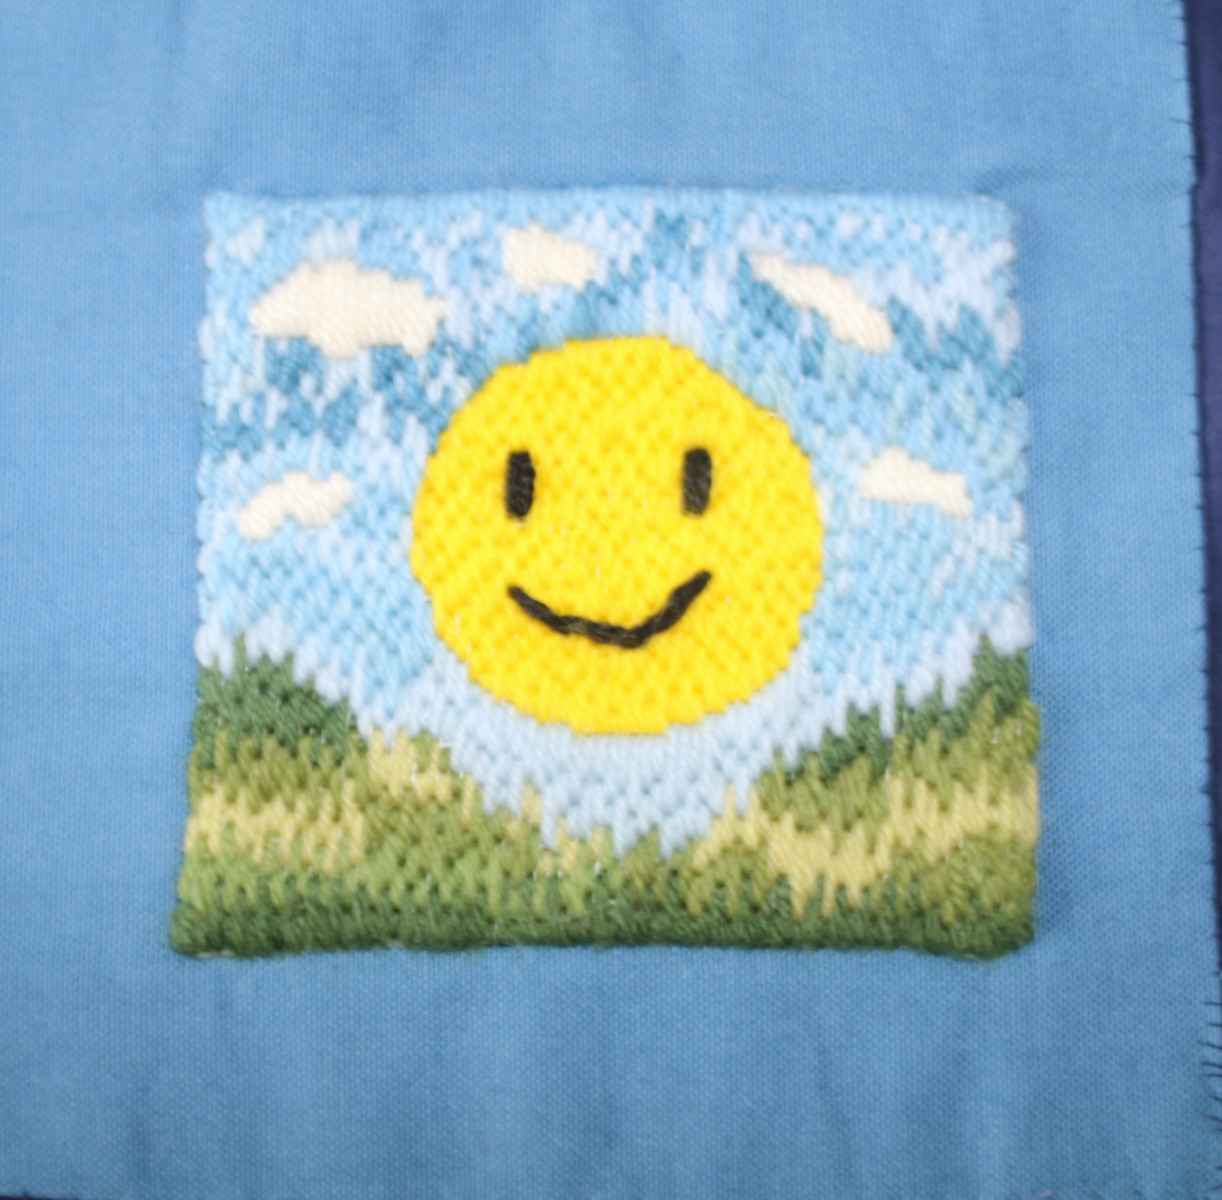 Embroidery of a smiling sun